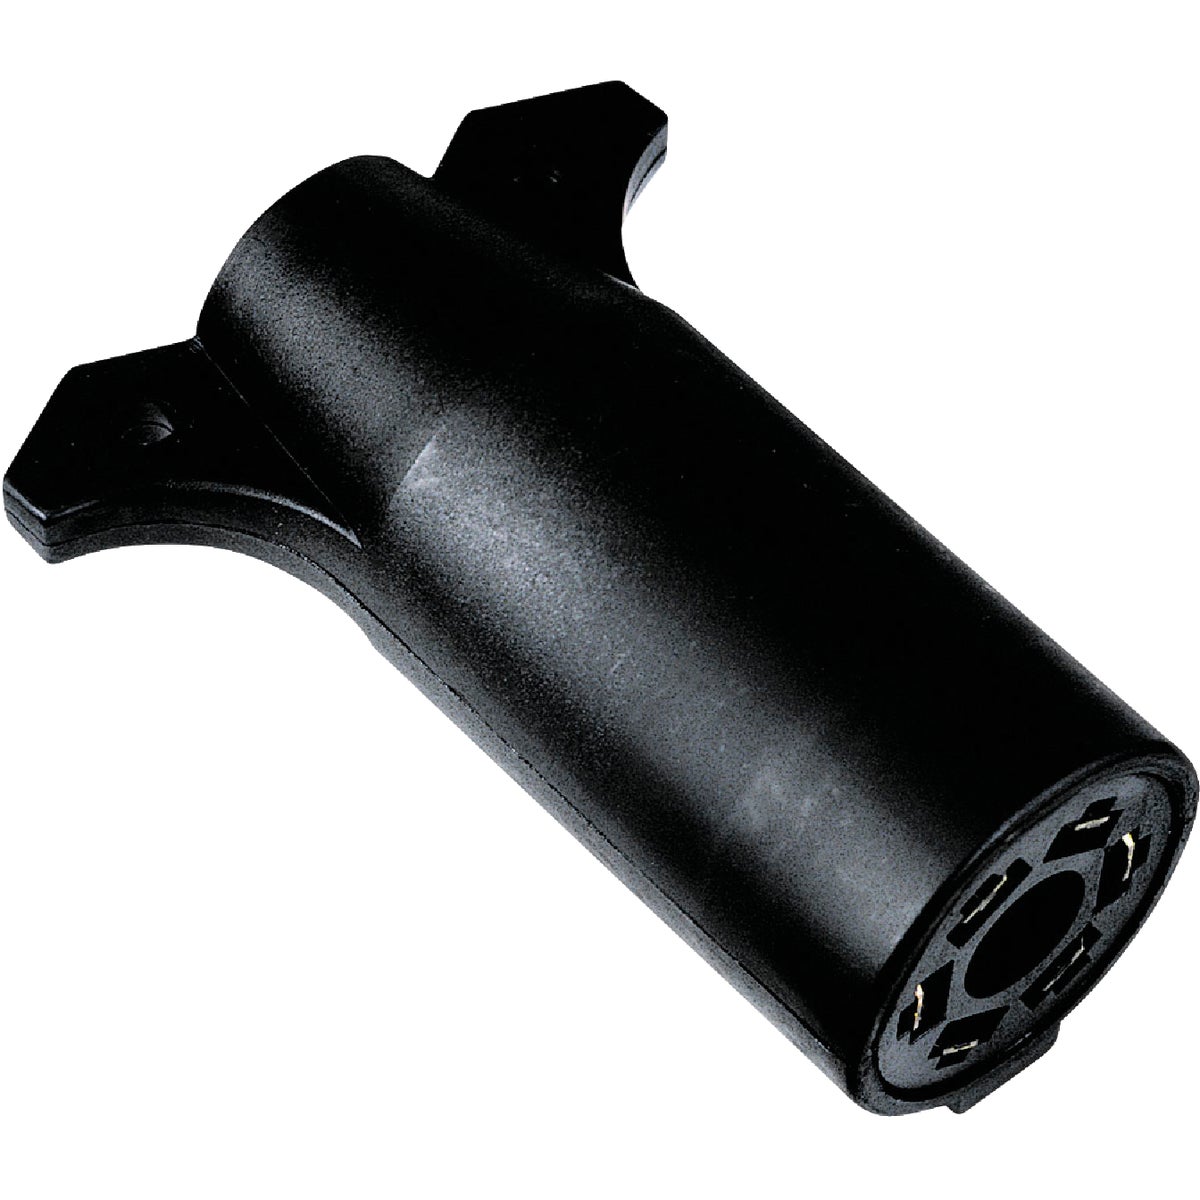 Item 573167, The 47545 7-Blade to 6-Pole Round adapter allows you to adapt down from a 7